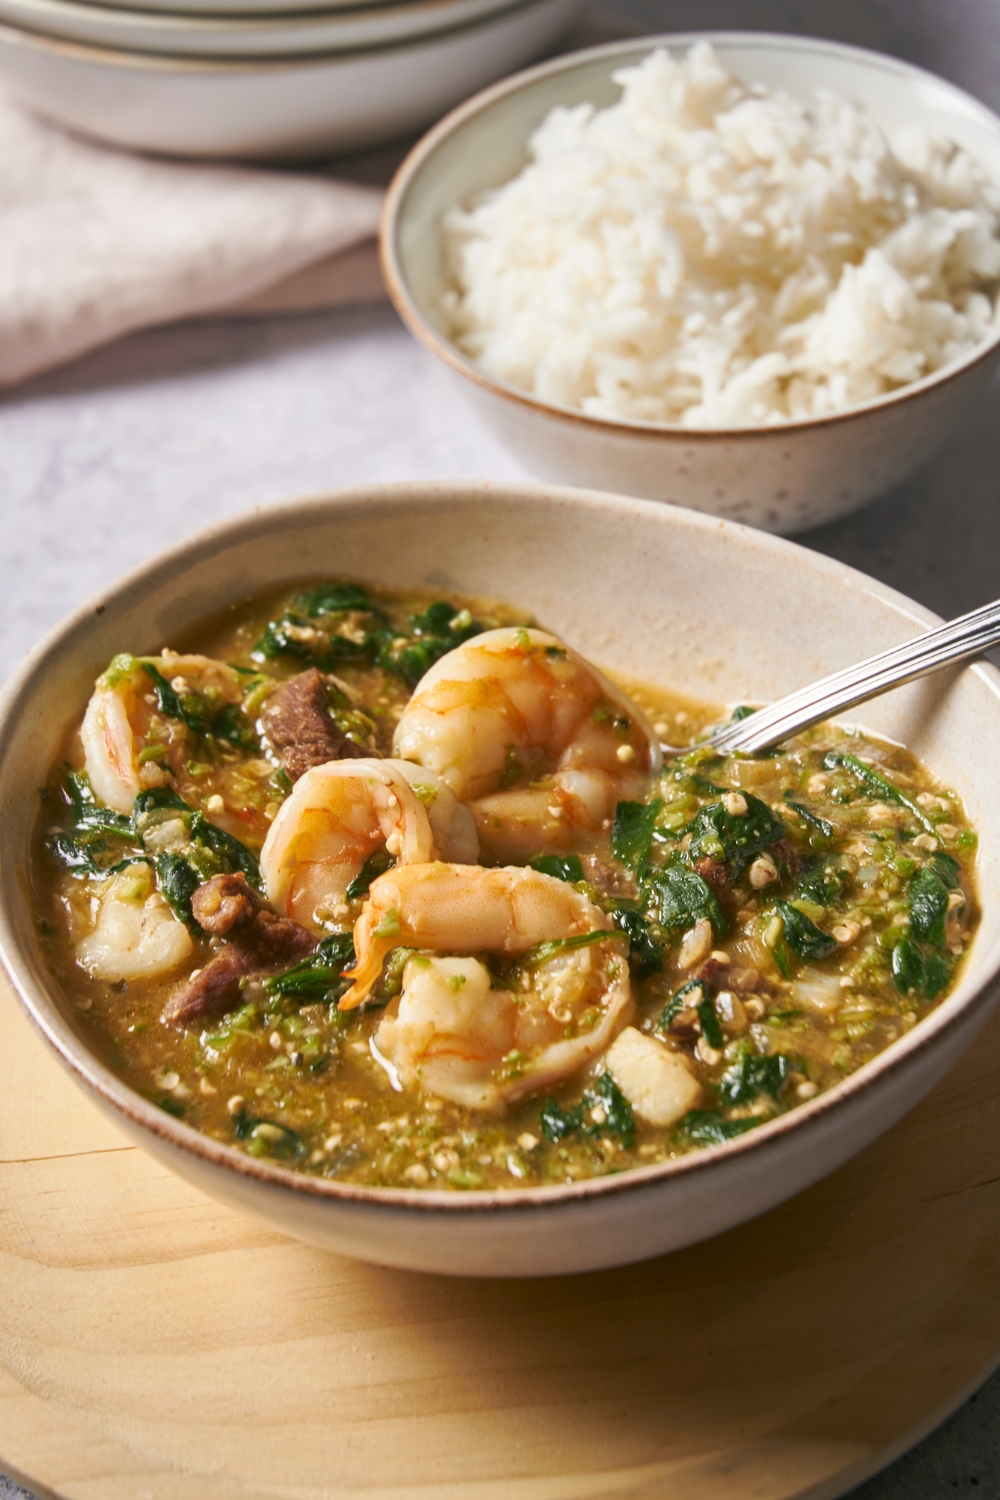 Shrimp, steak, spinach, and ground okra in a bowl of broth.